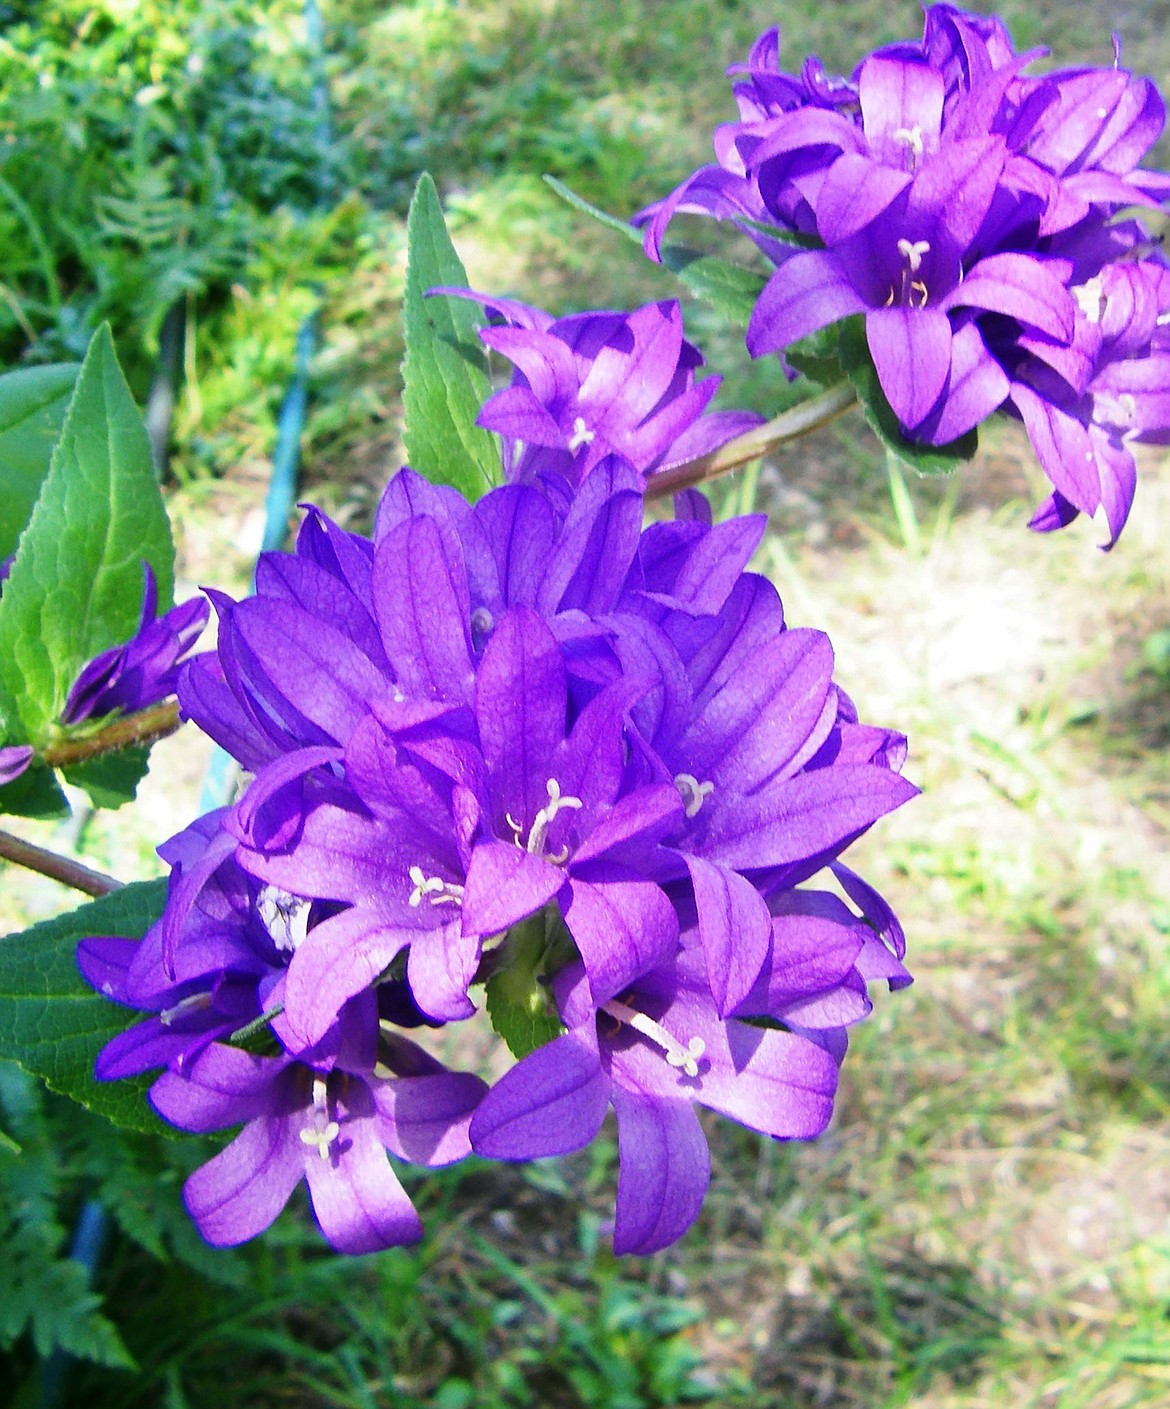 Lovely campanula glomerata is just one of many cultivars of the bellflower family.